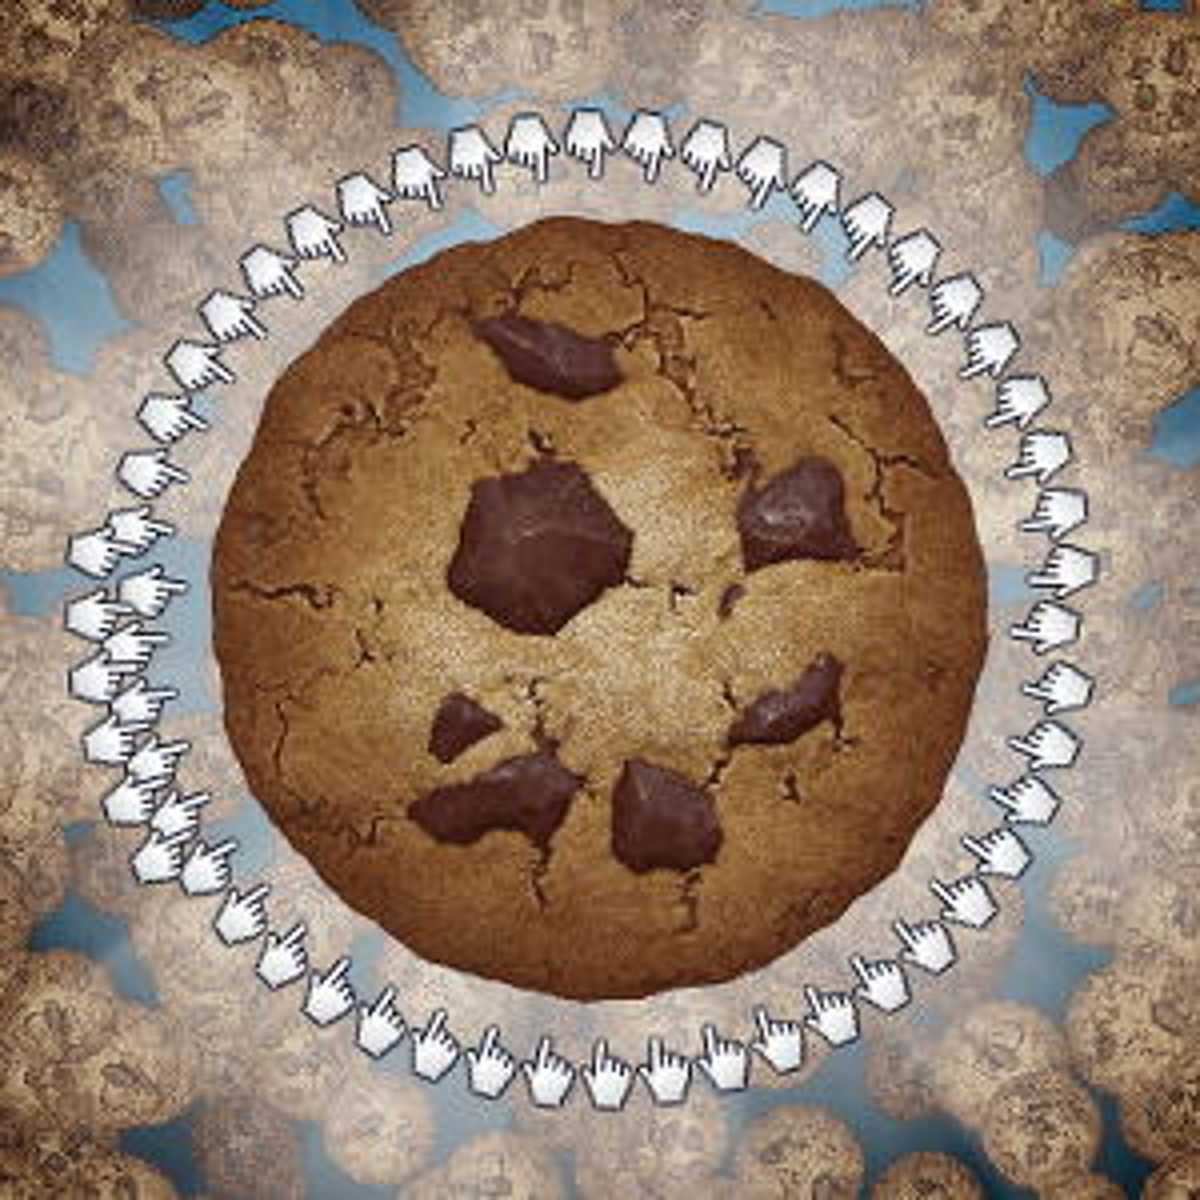 Cookie Clicker - Play on PC & Enjoy the Fun Clicking Game!